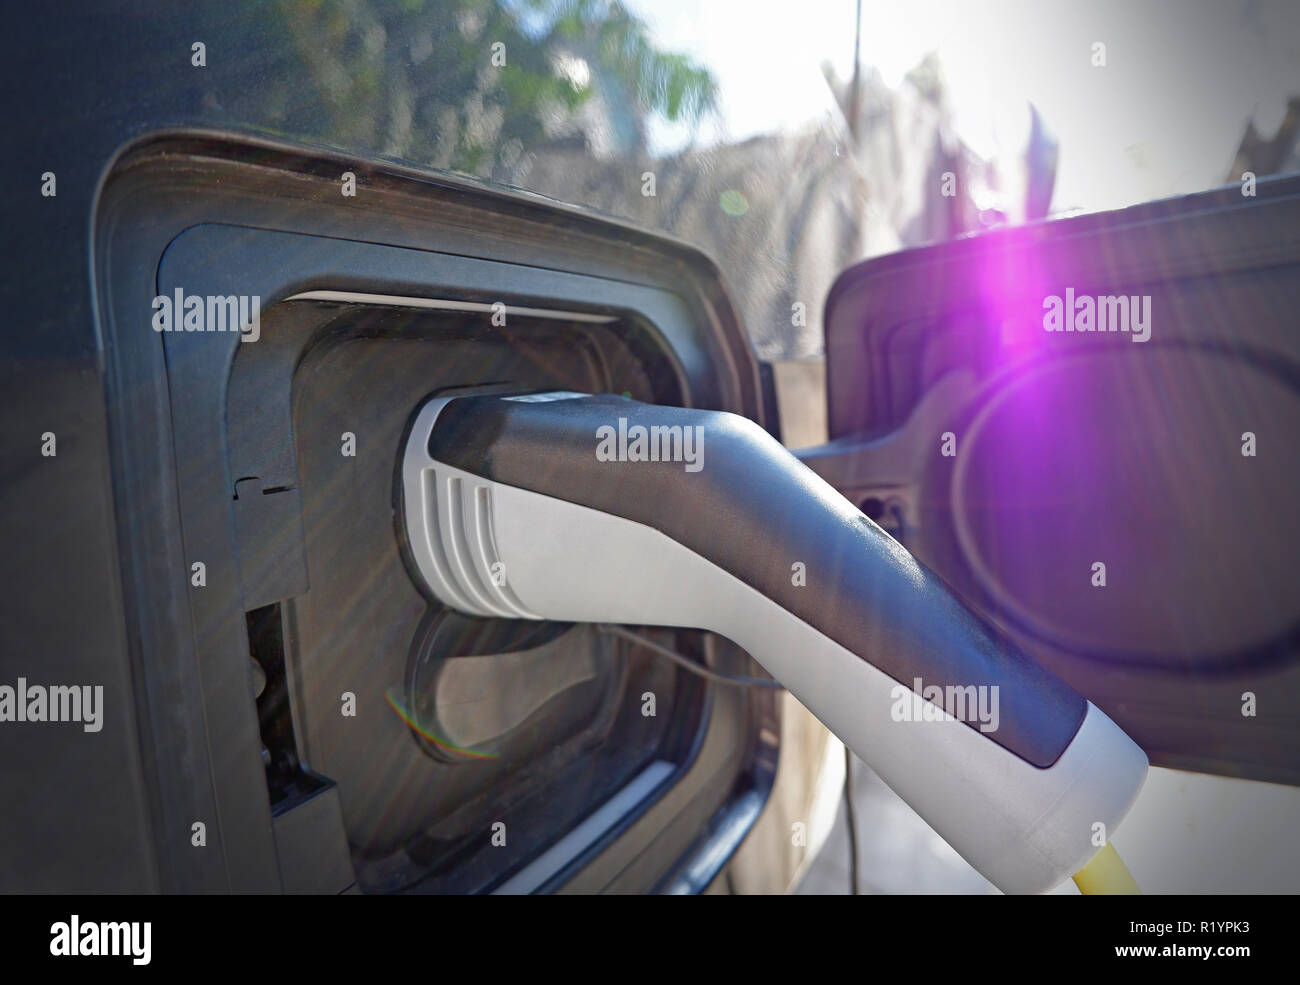 The close up of recharging cable and electric car Stock Photo